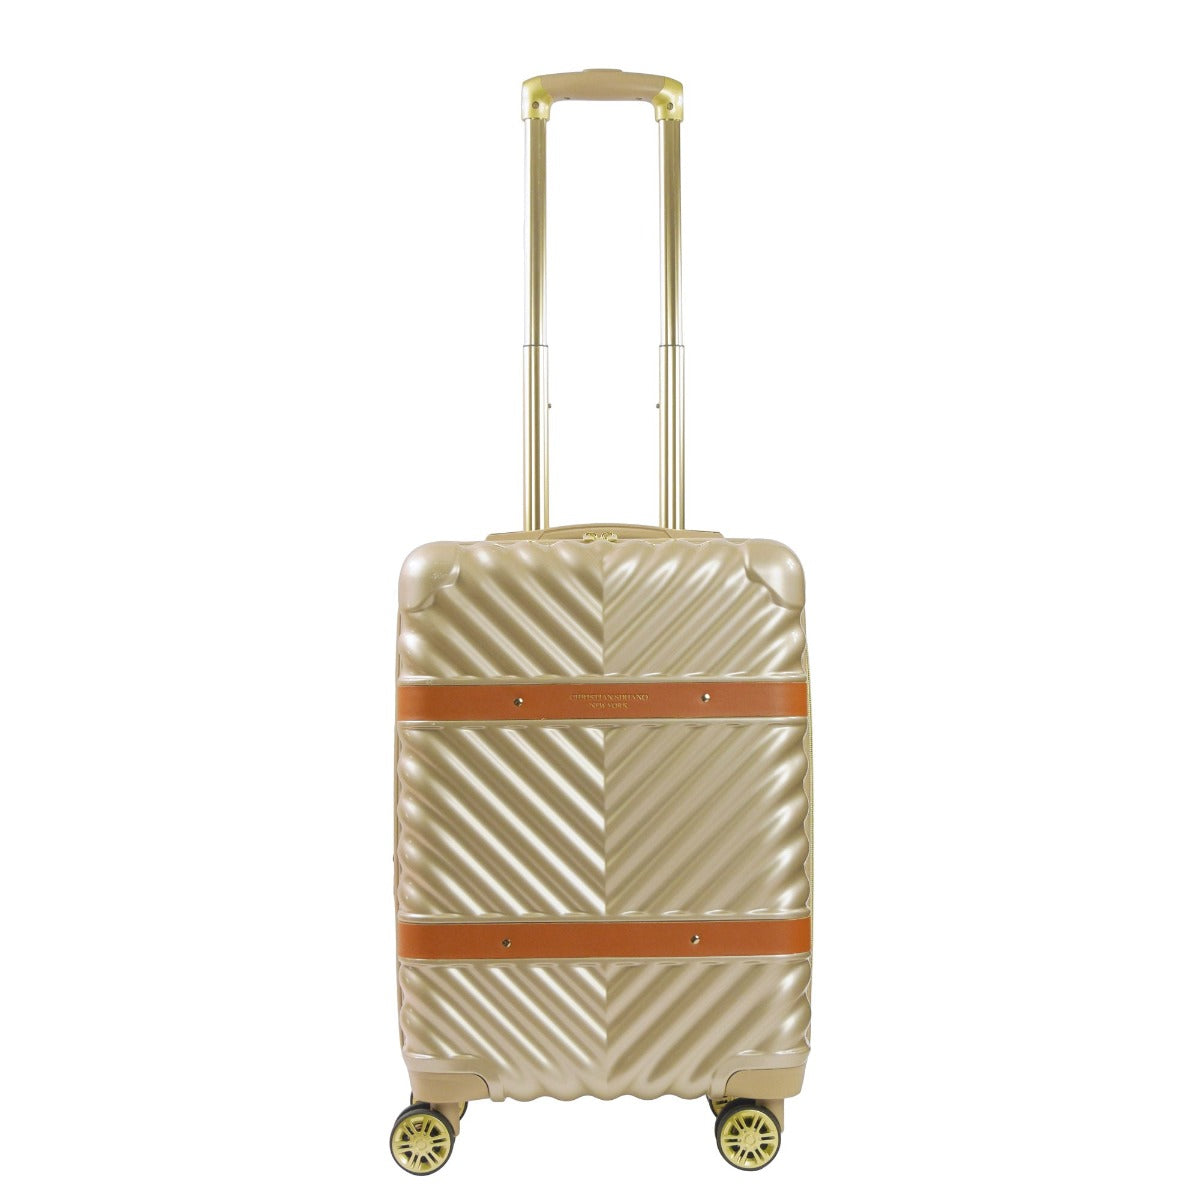 Christian Siriano New York Stella 22 inch hardside spinner luggage taupe - best carry on suitcases suitcase for travelling